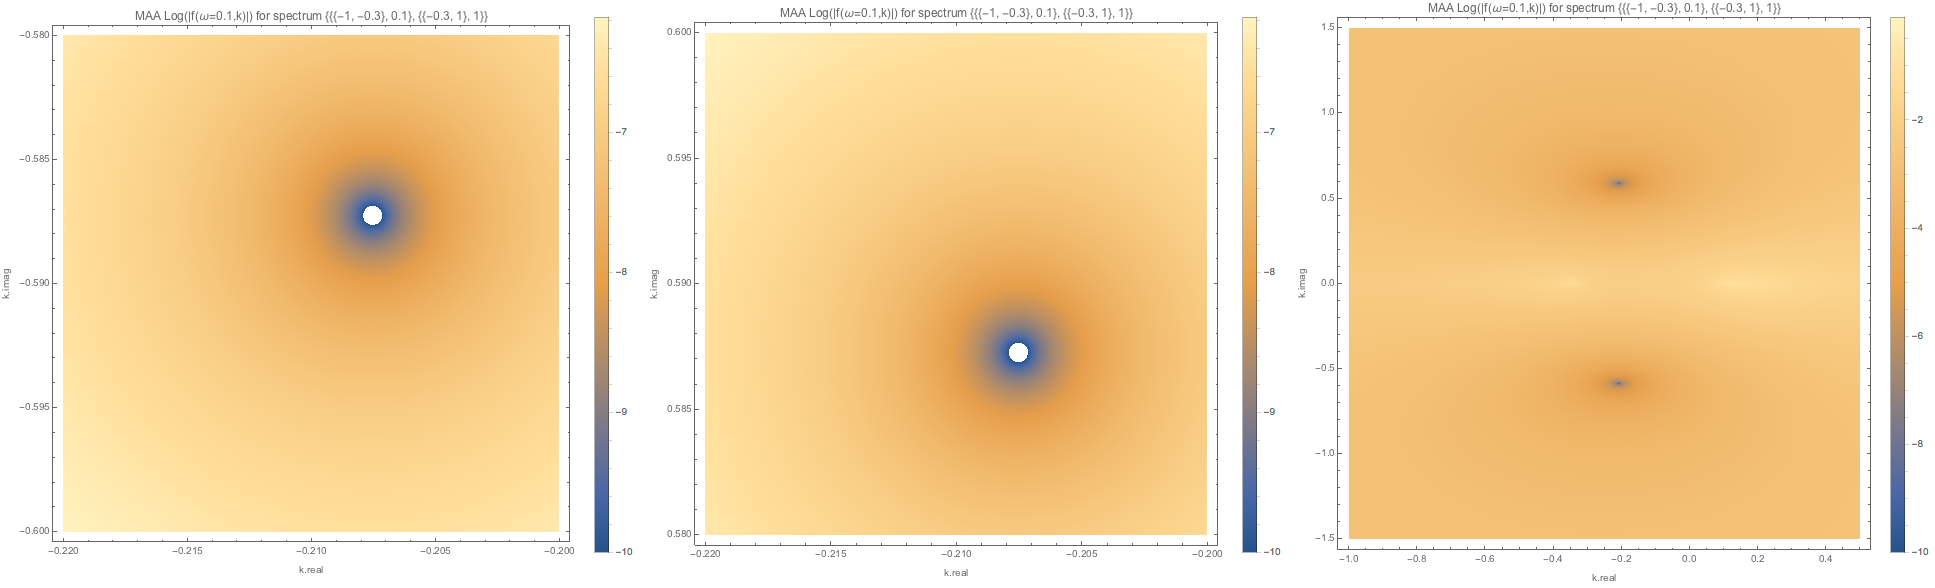 ../../_images/f-of-omega-0.1-and-k-densityplot-log-maa-spectwc3.png